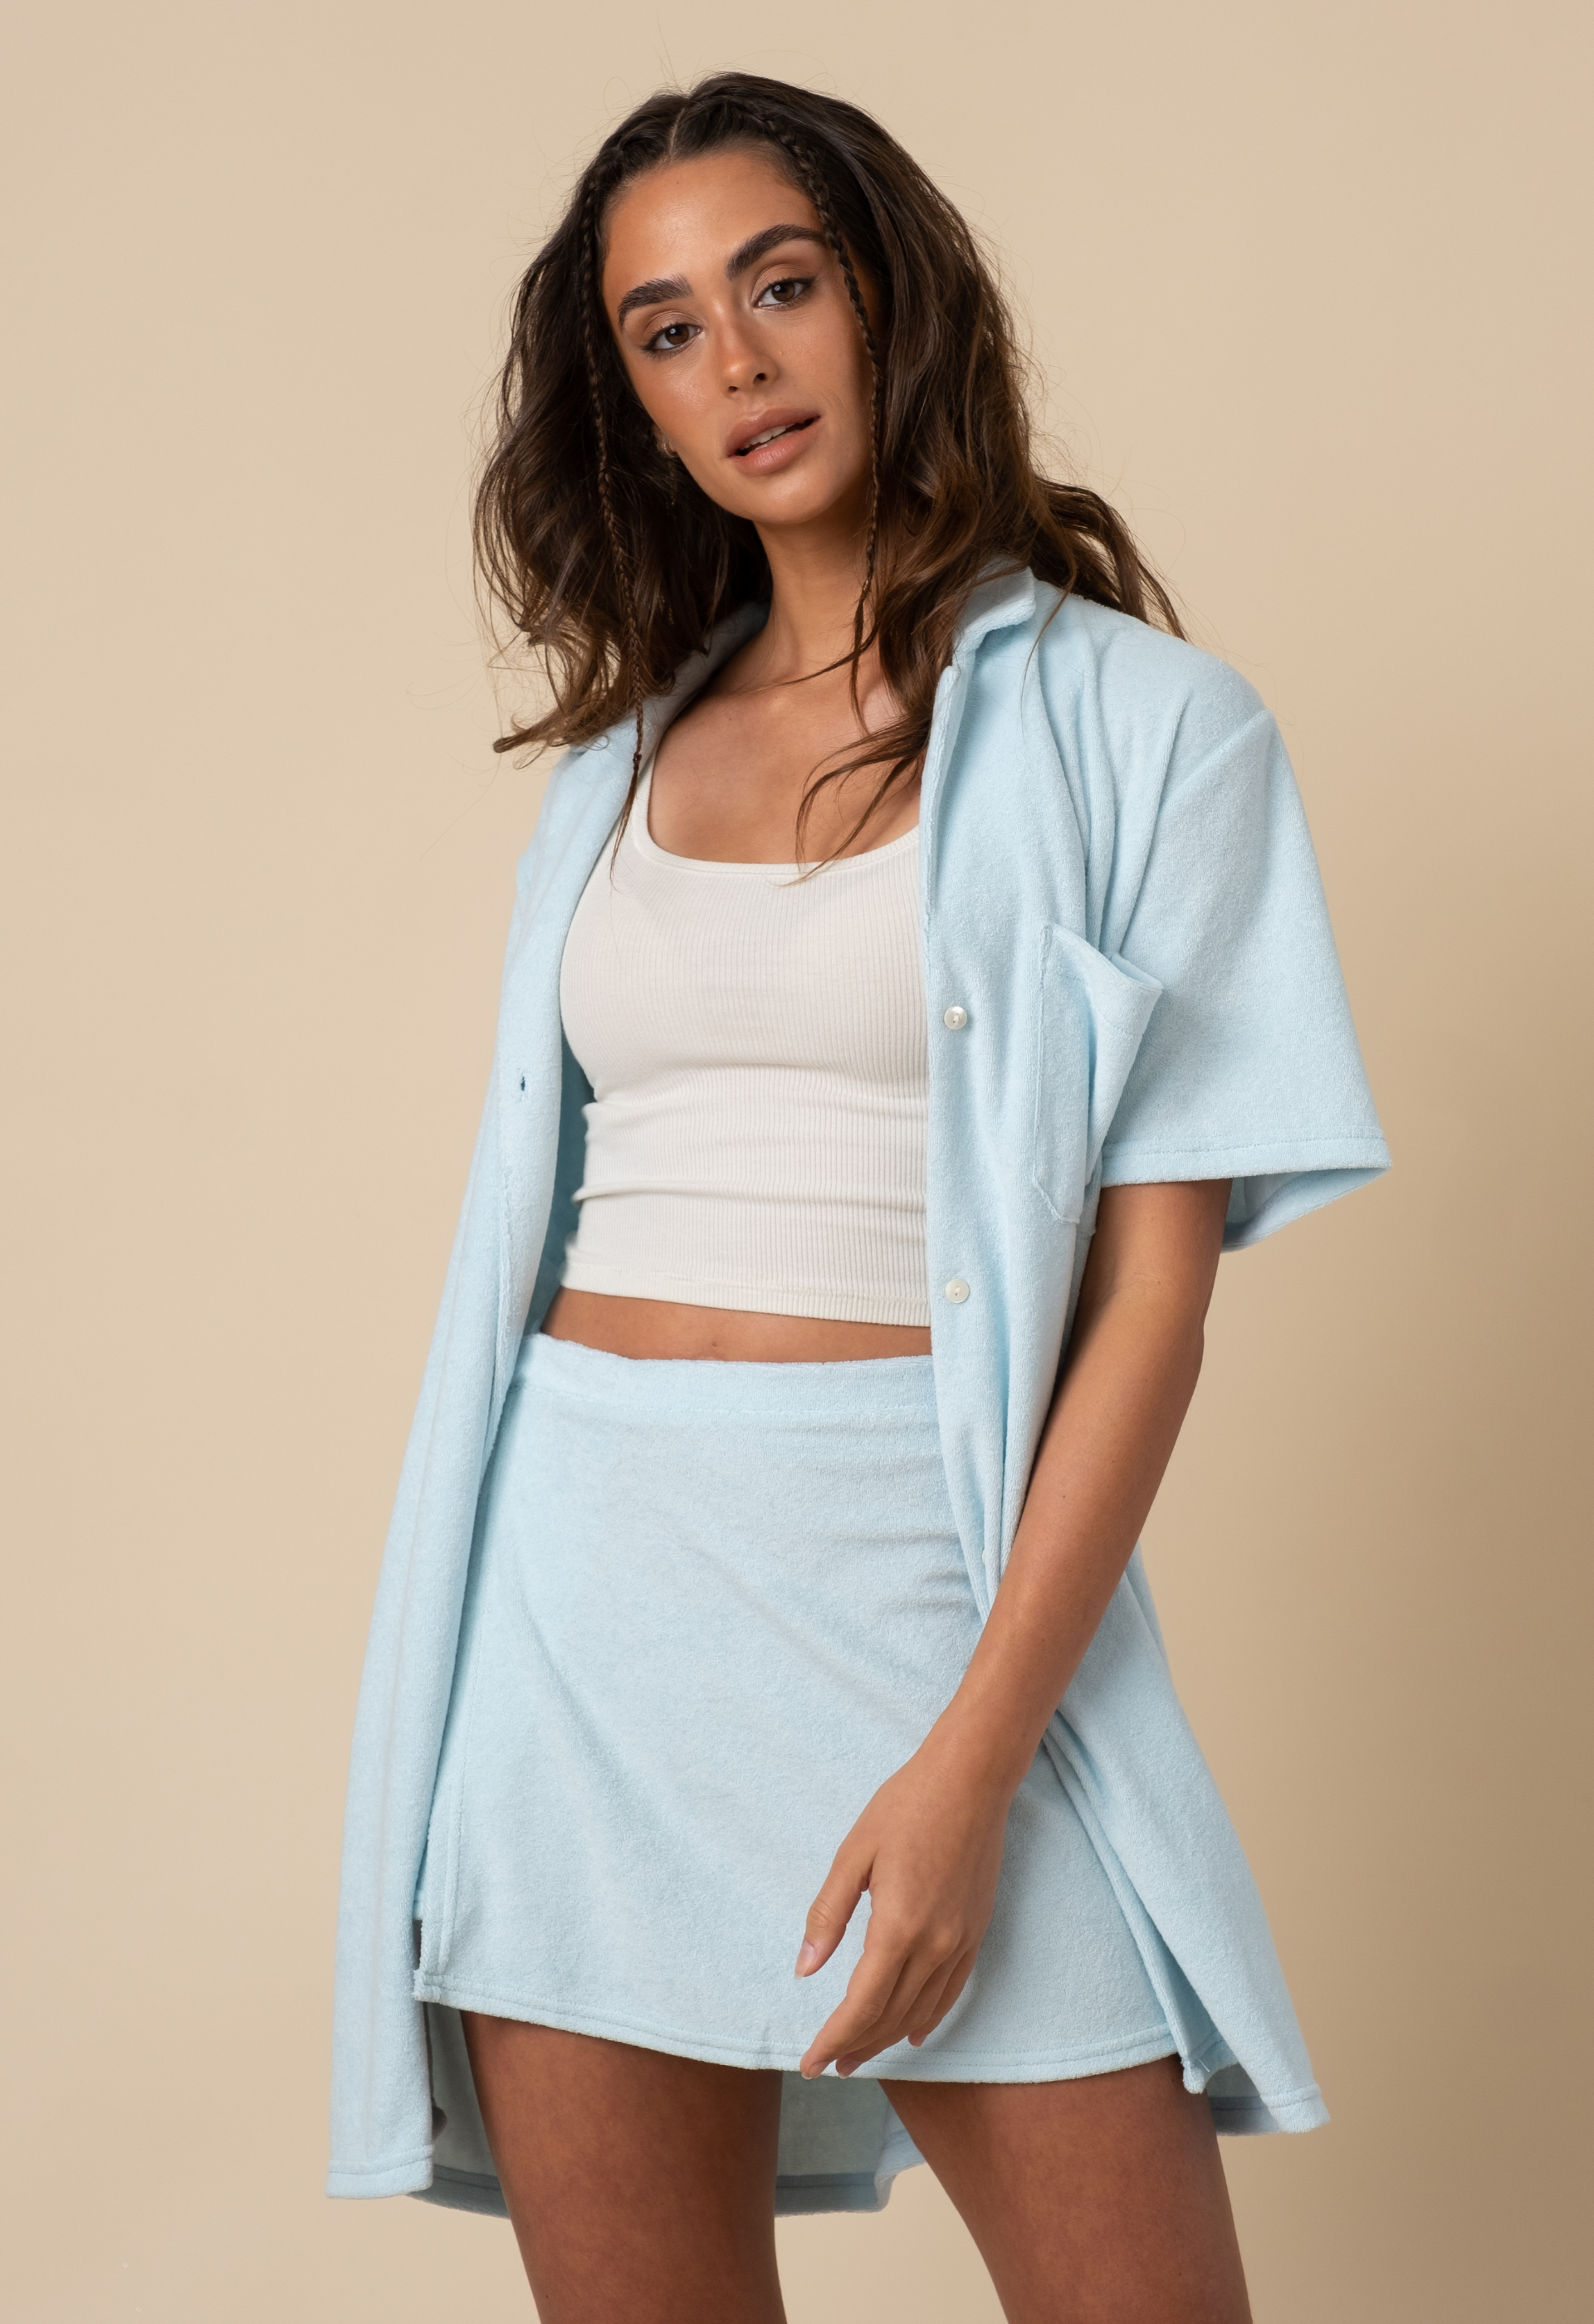 Terry Skirt in Baby Blue